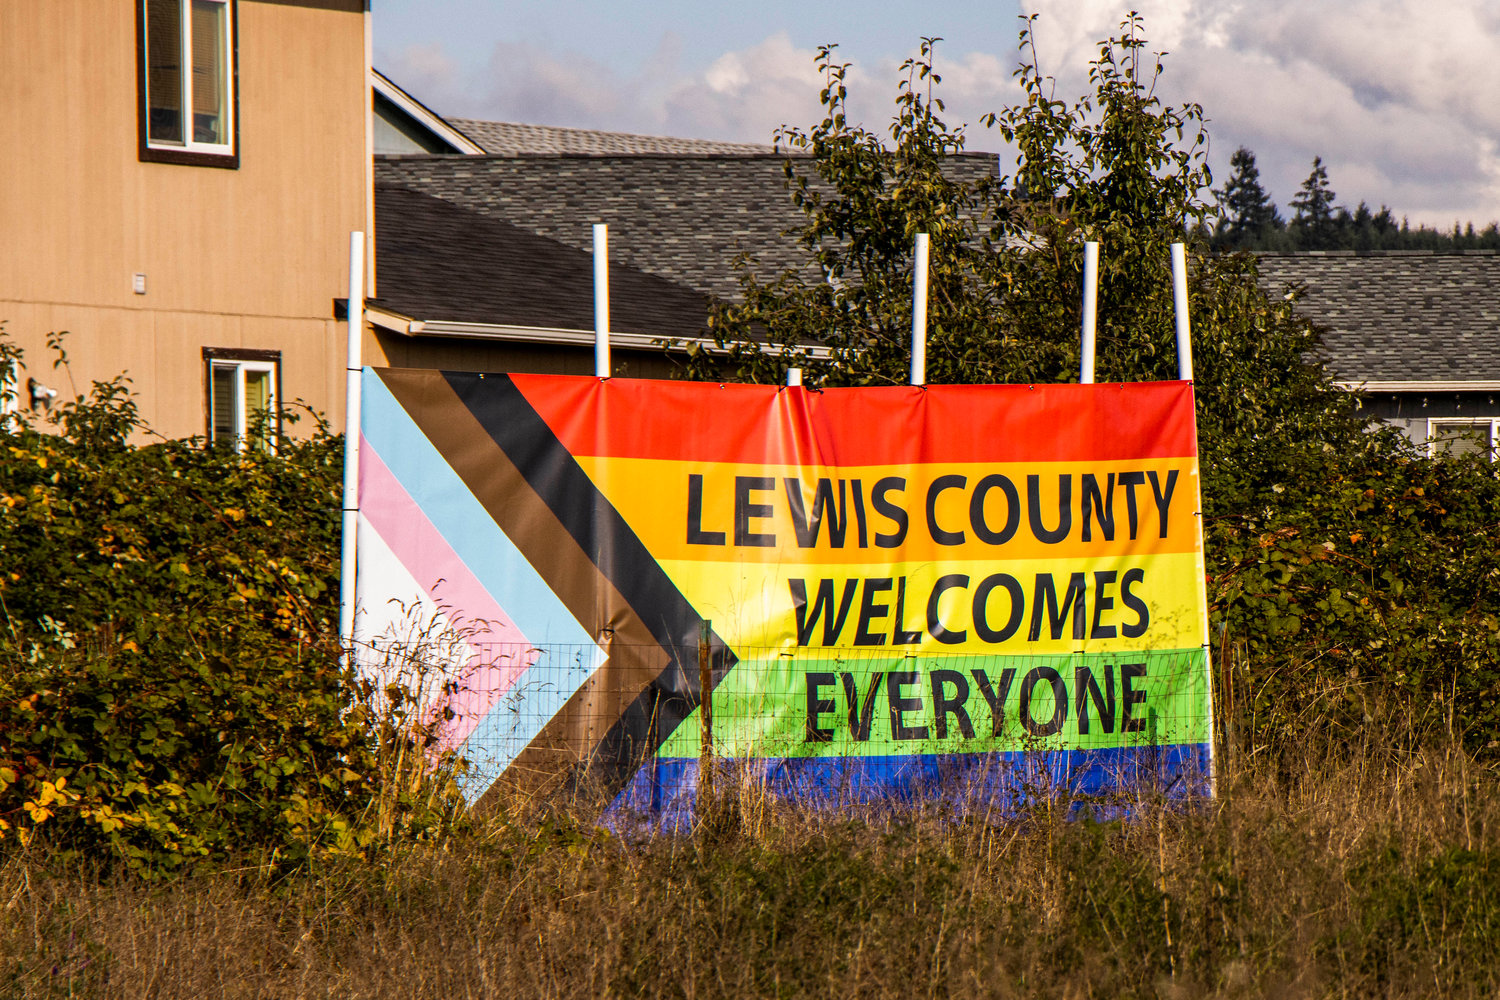 A new ‘Lewis County Welcomes Everyone’ sign was installed in view from Interstate 5 in south Chehalis seen Thursday.